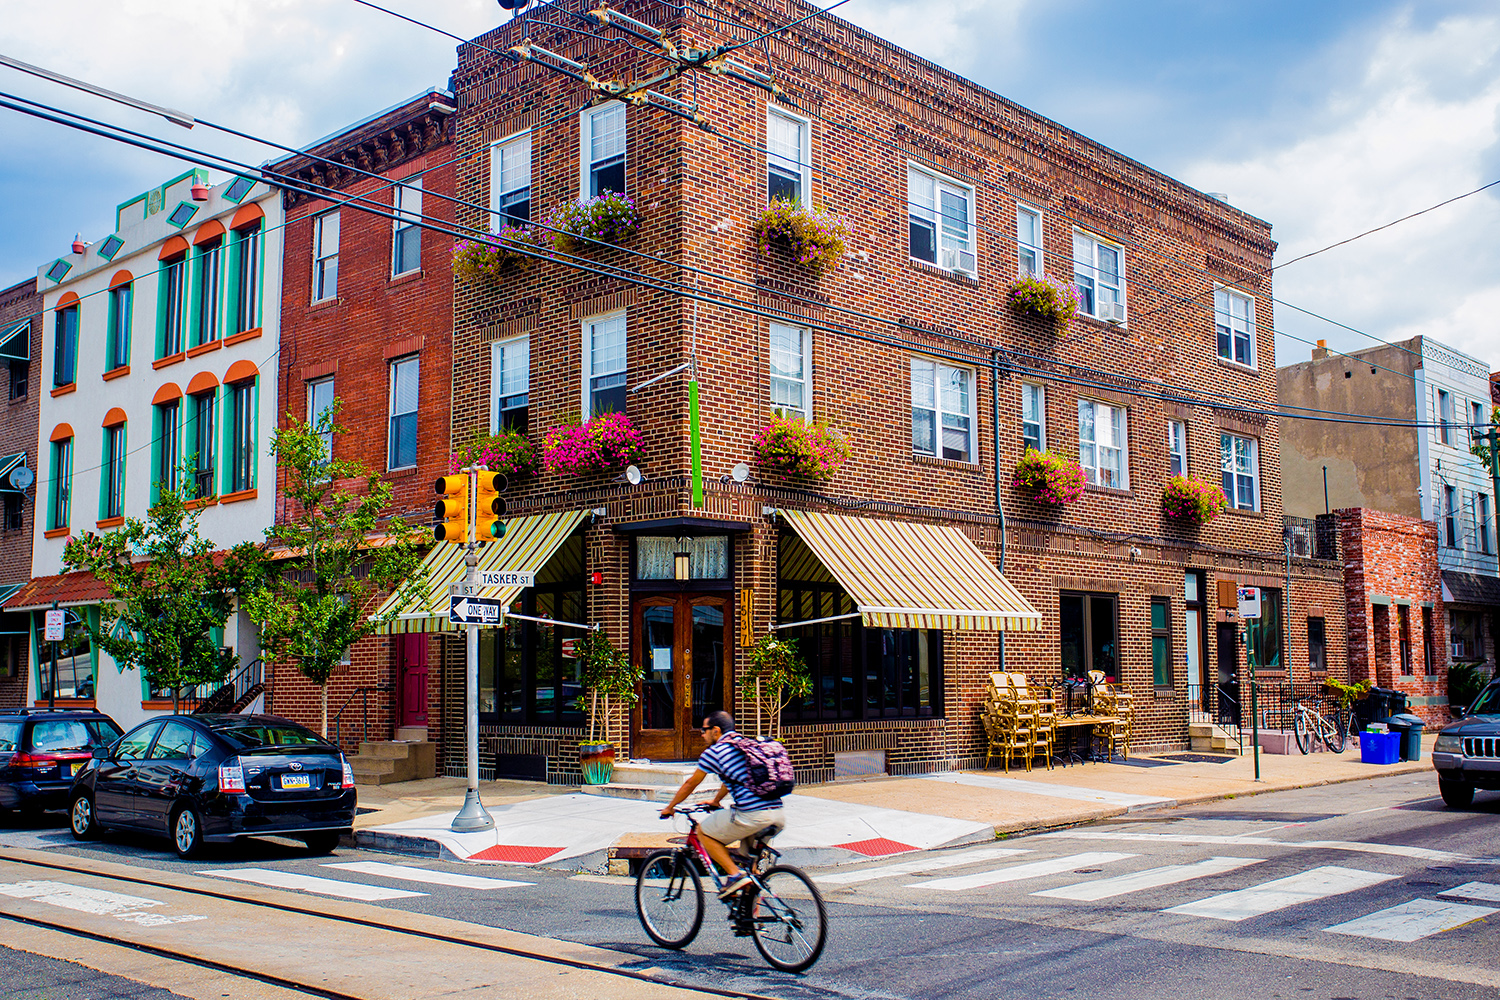 Old meets new in East Passyunk, a hub for great drinking and dining in Philadelphia. Image courtesy of J. Fusco / VISIT PHILADELPHIA